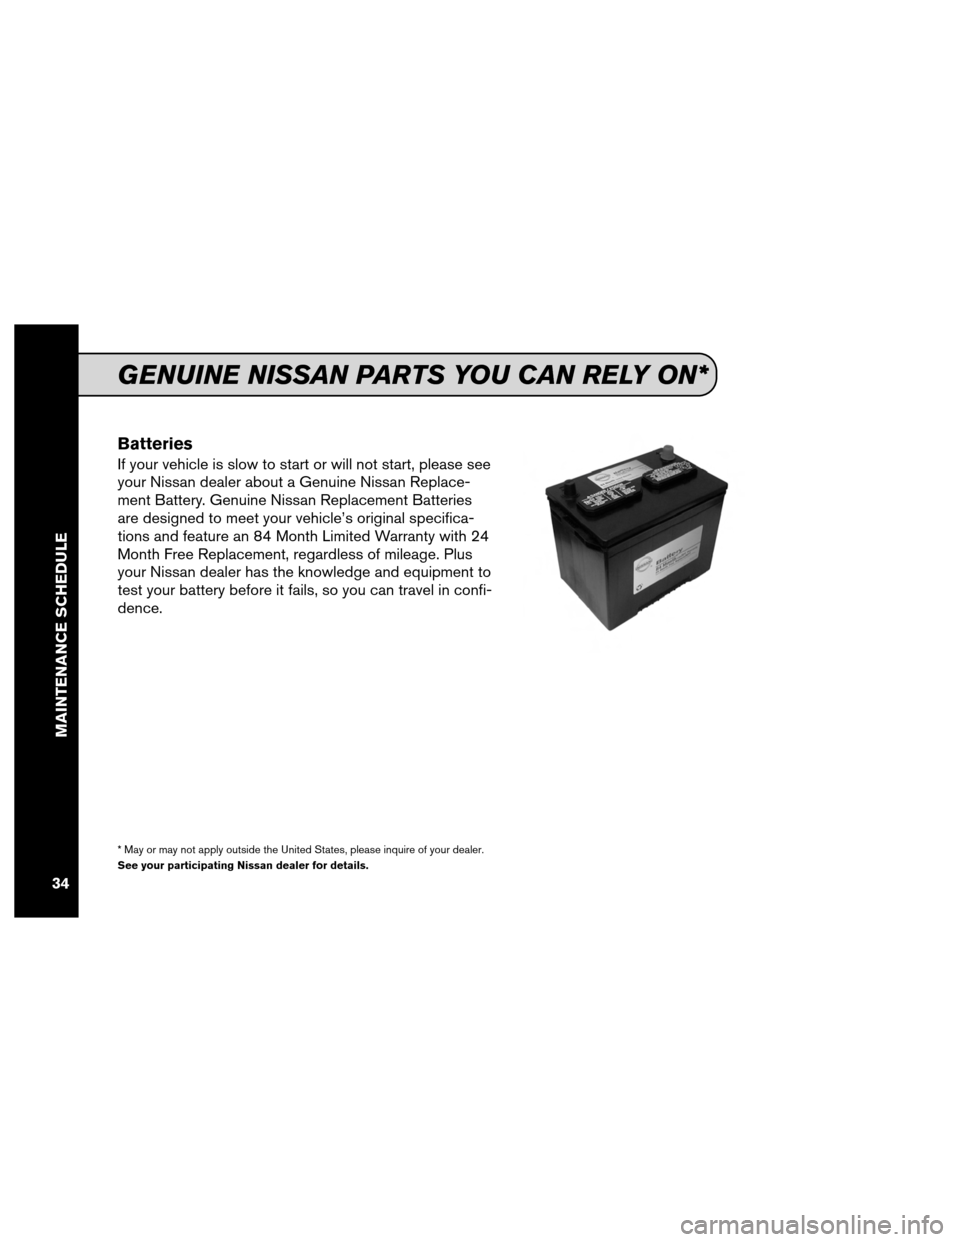 NISSAN MAXIMA 2012 A35 / 7.G Service And Maintenance Guide Batteries
If your vehicle is slow to start or will not start, please see
your Nissan dealer about a Genuine Nissan Replace-
ment Battery. Genuine Nissan Replacement Batteries
are designed to meet your